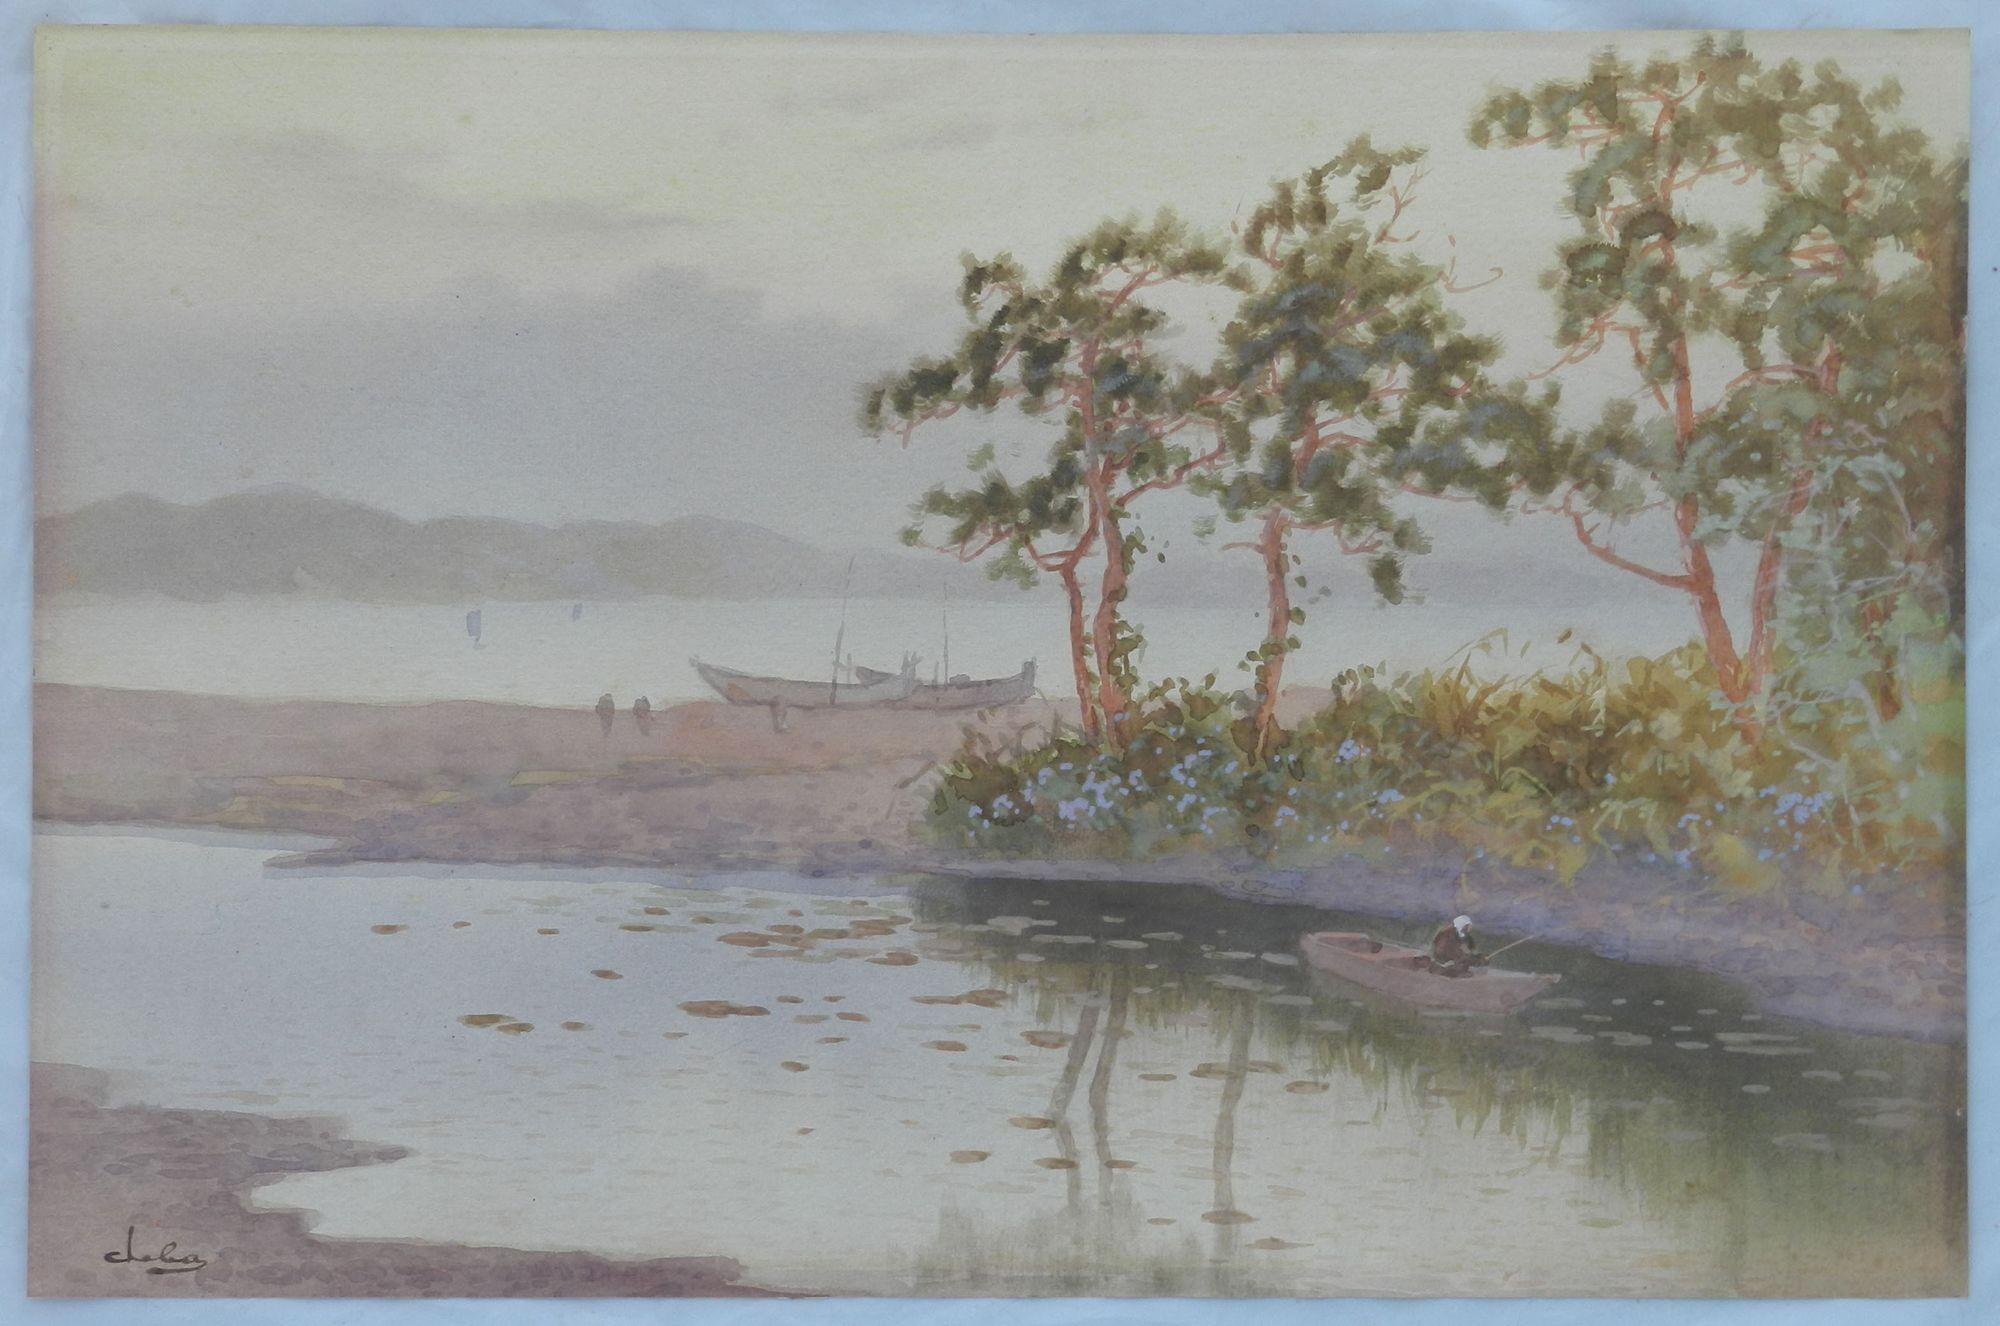 Lakeside Evening Watercolor Painting Pastel Impressionist early 20th Century
Signed by artist 
Evening at lakeside in great pastel colors
With frame (sorry apologies no glass for shipping)
53.5cm 21ins x 36.5cm 14.37ins
 
 